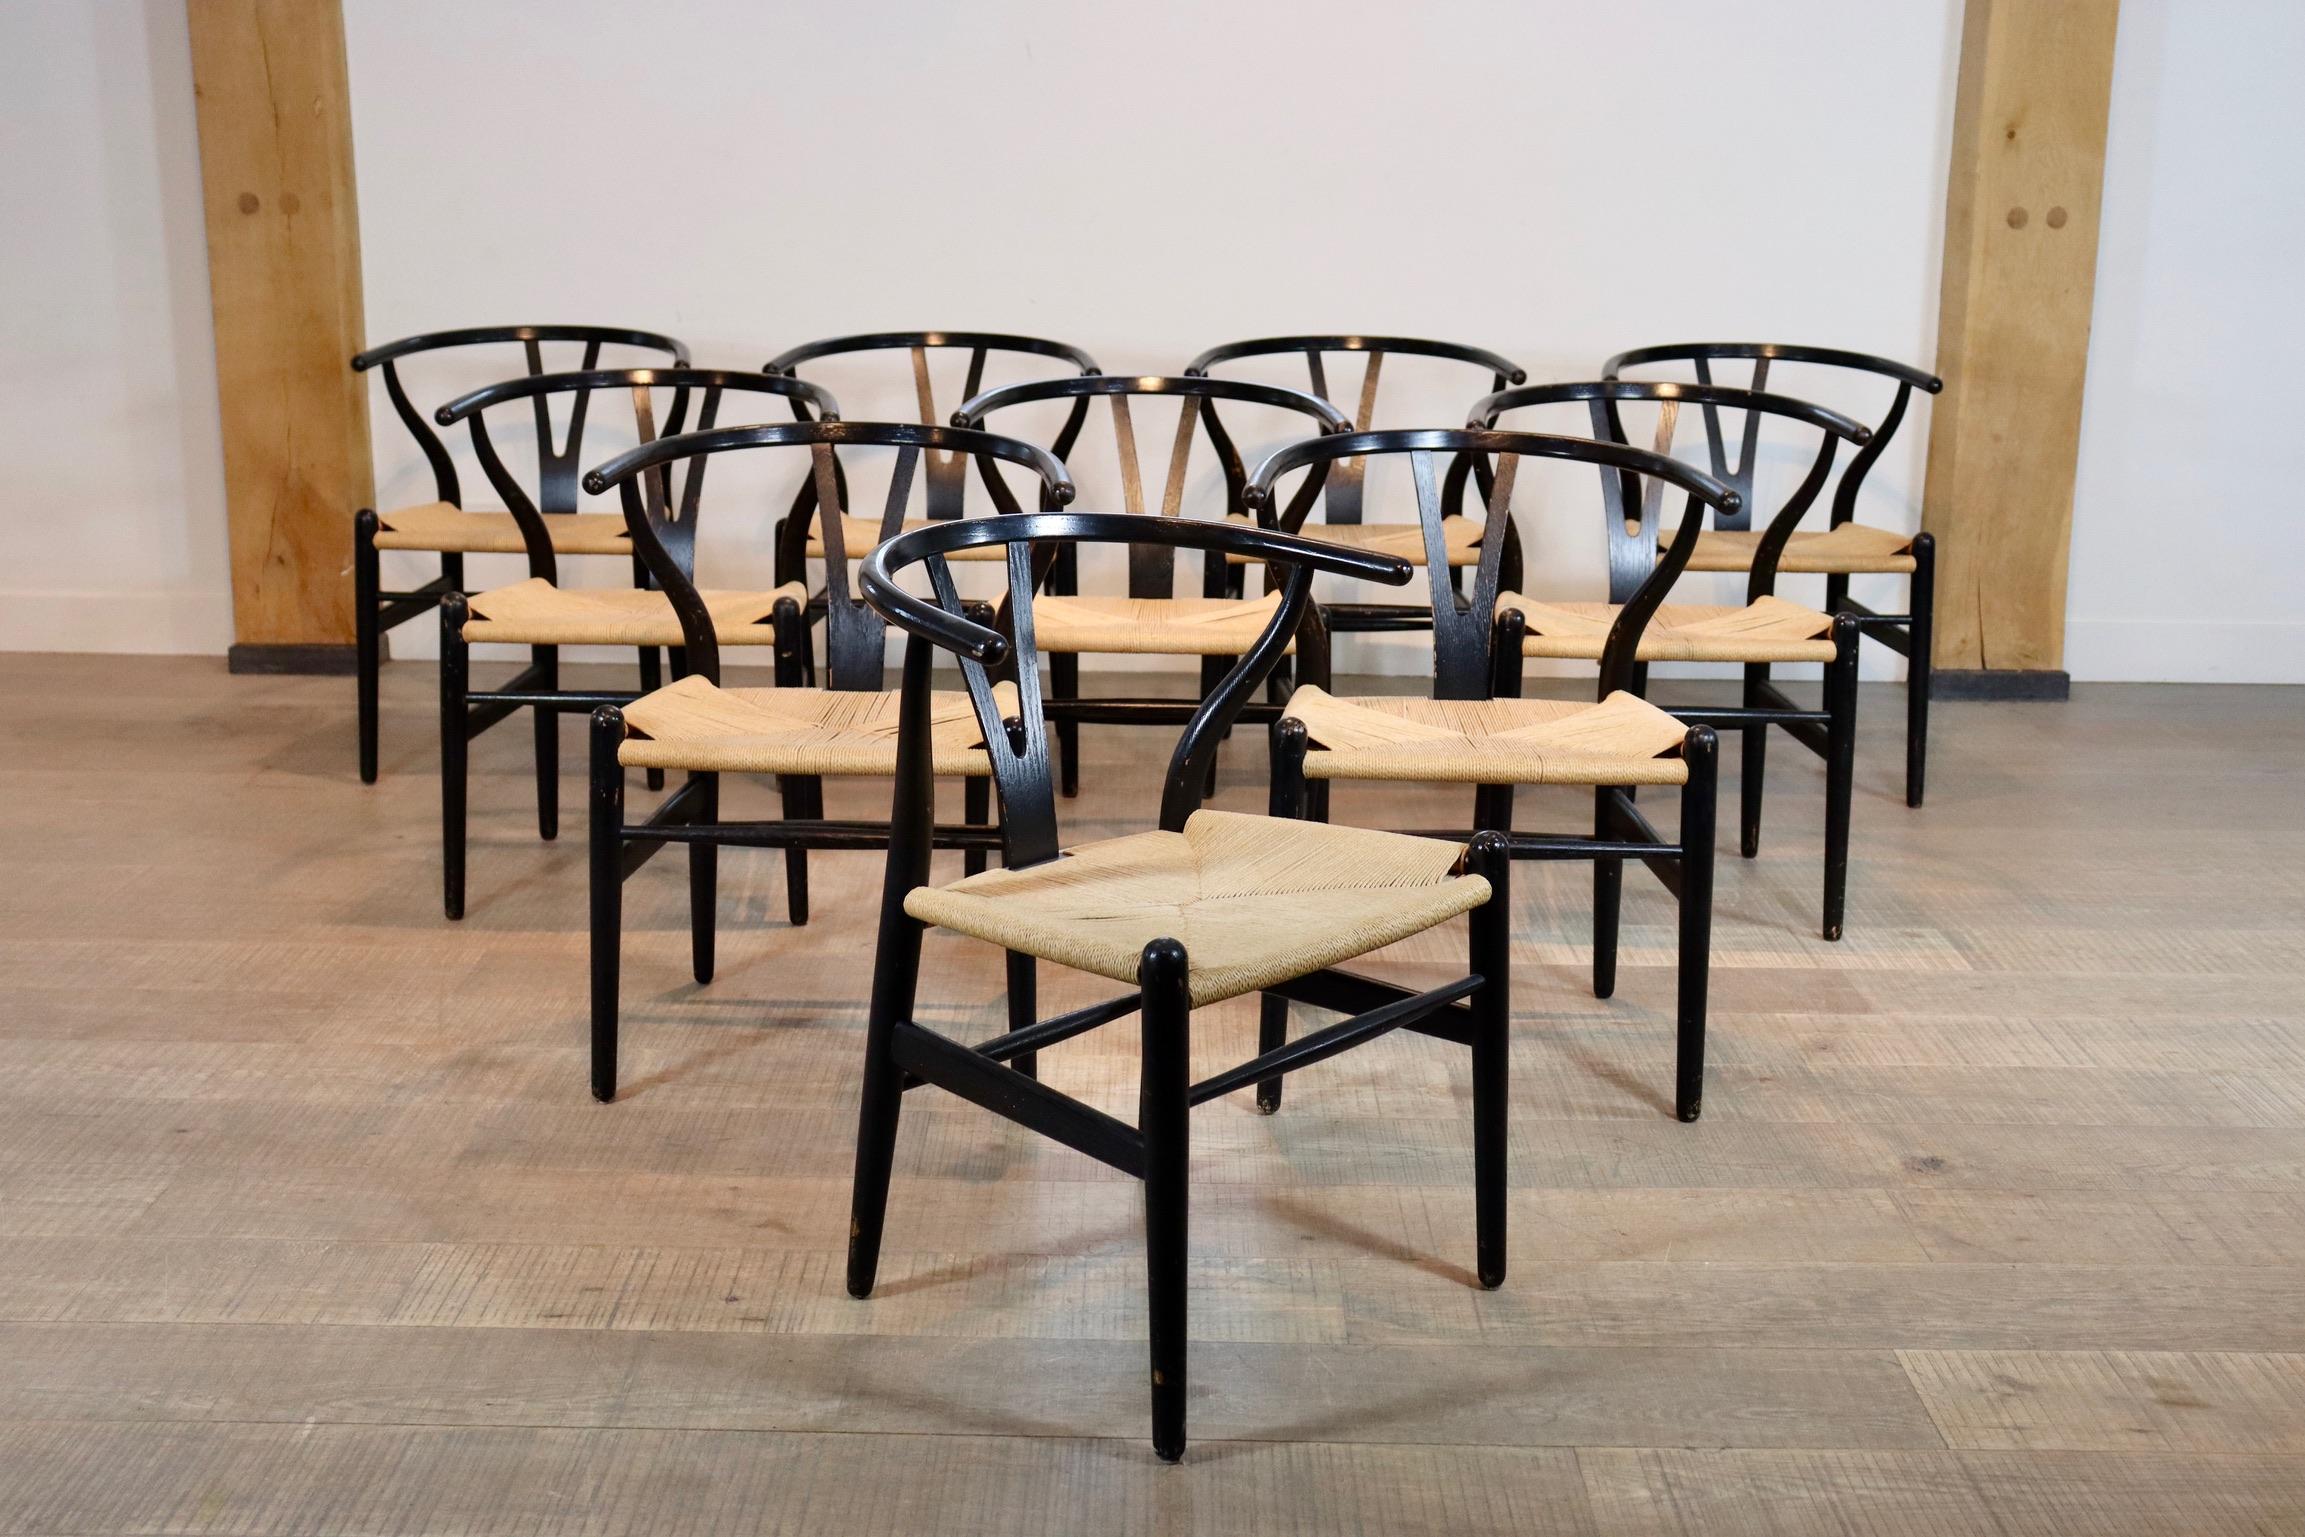 Gorgeous set of 10 vintage CH24 wishbone chairs with black frame by Hans J. Wegner. The chairs have original papercord seating and a solid oak frame that has been originally painted black. All chairs are marked 

Dimensions: H73 x W56 x D46cm